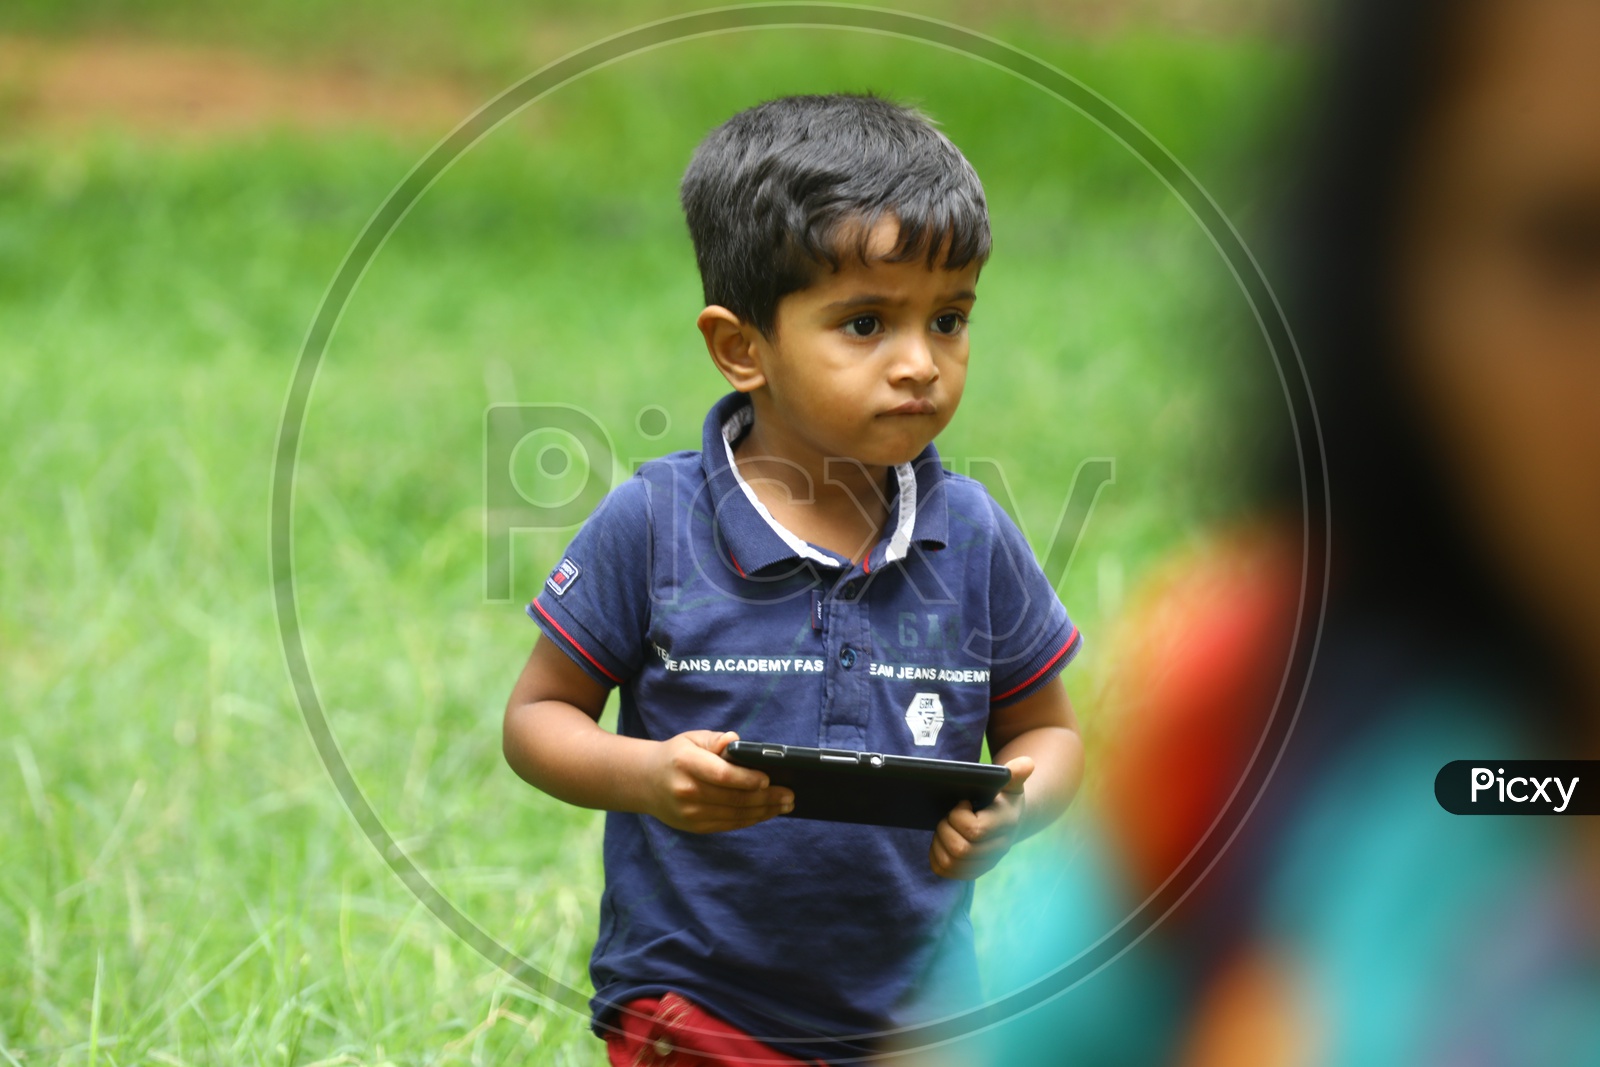 A little boy holding a mobile phone